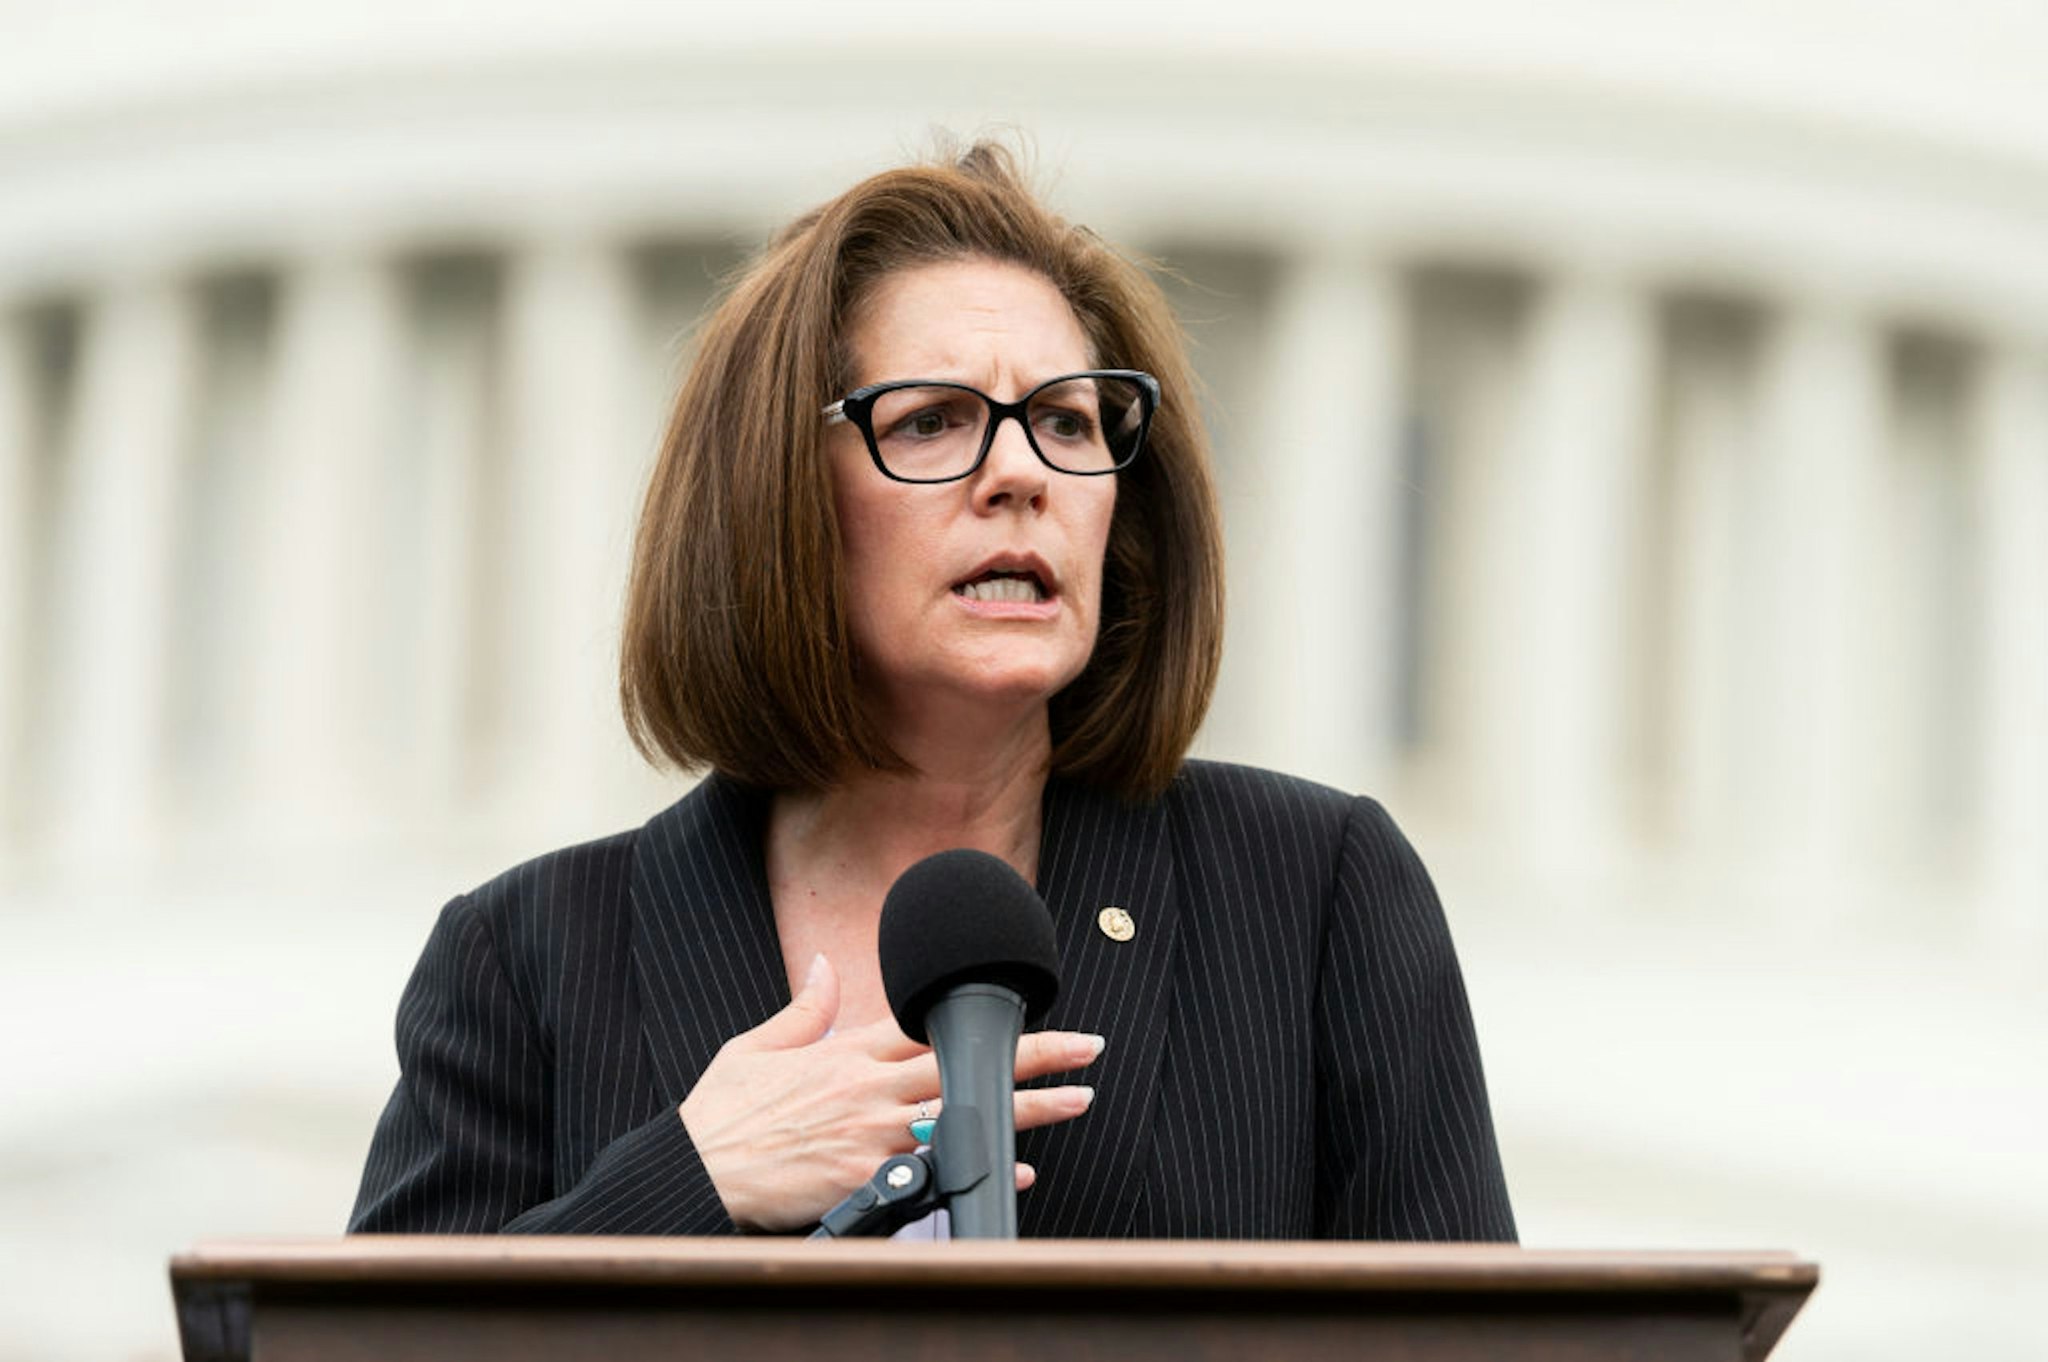 WASHINGTON, D C , UNITED STATES - 2019/06/20: U.S. Senator Catherine Cortez Masto (D-NV) speaks during the event in front of the Capitol to urge the passage of the H.R. 8 universal (gun ownership) background checks legislation. Event was held at the grass on the eastern side of the U.S. Capitol in Washington, DC.